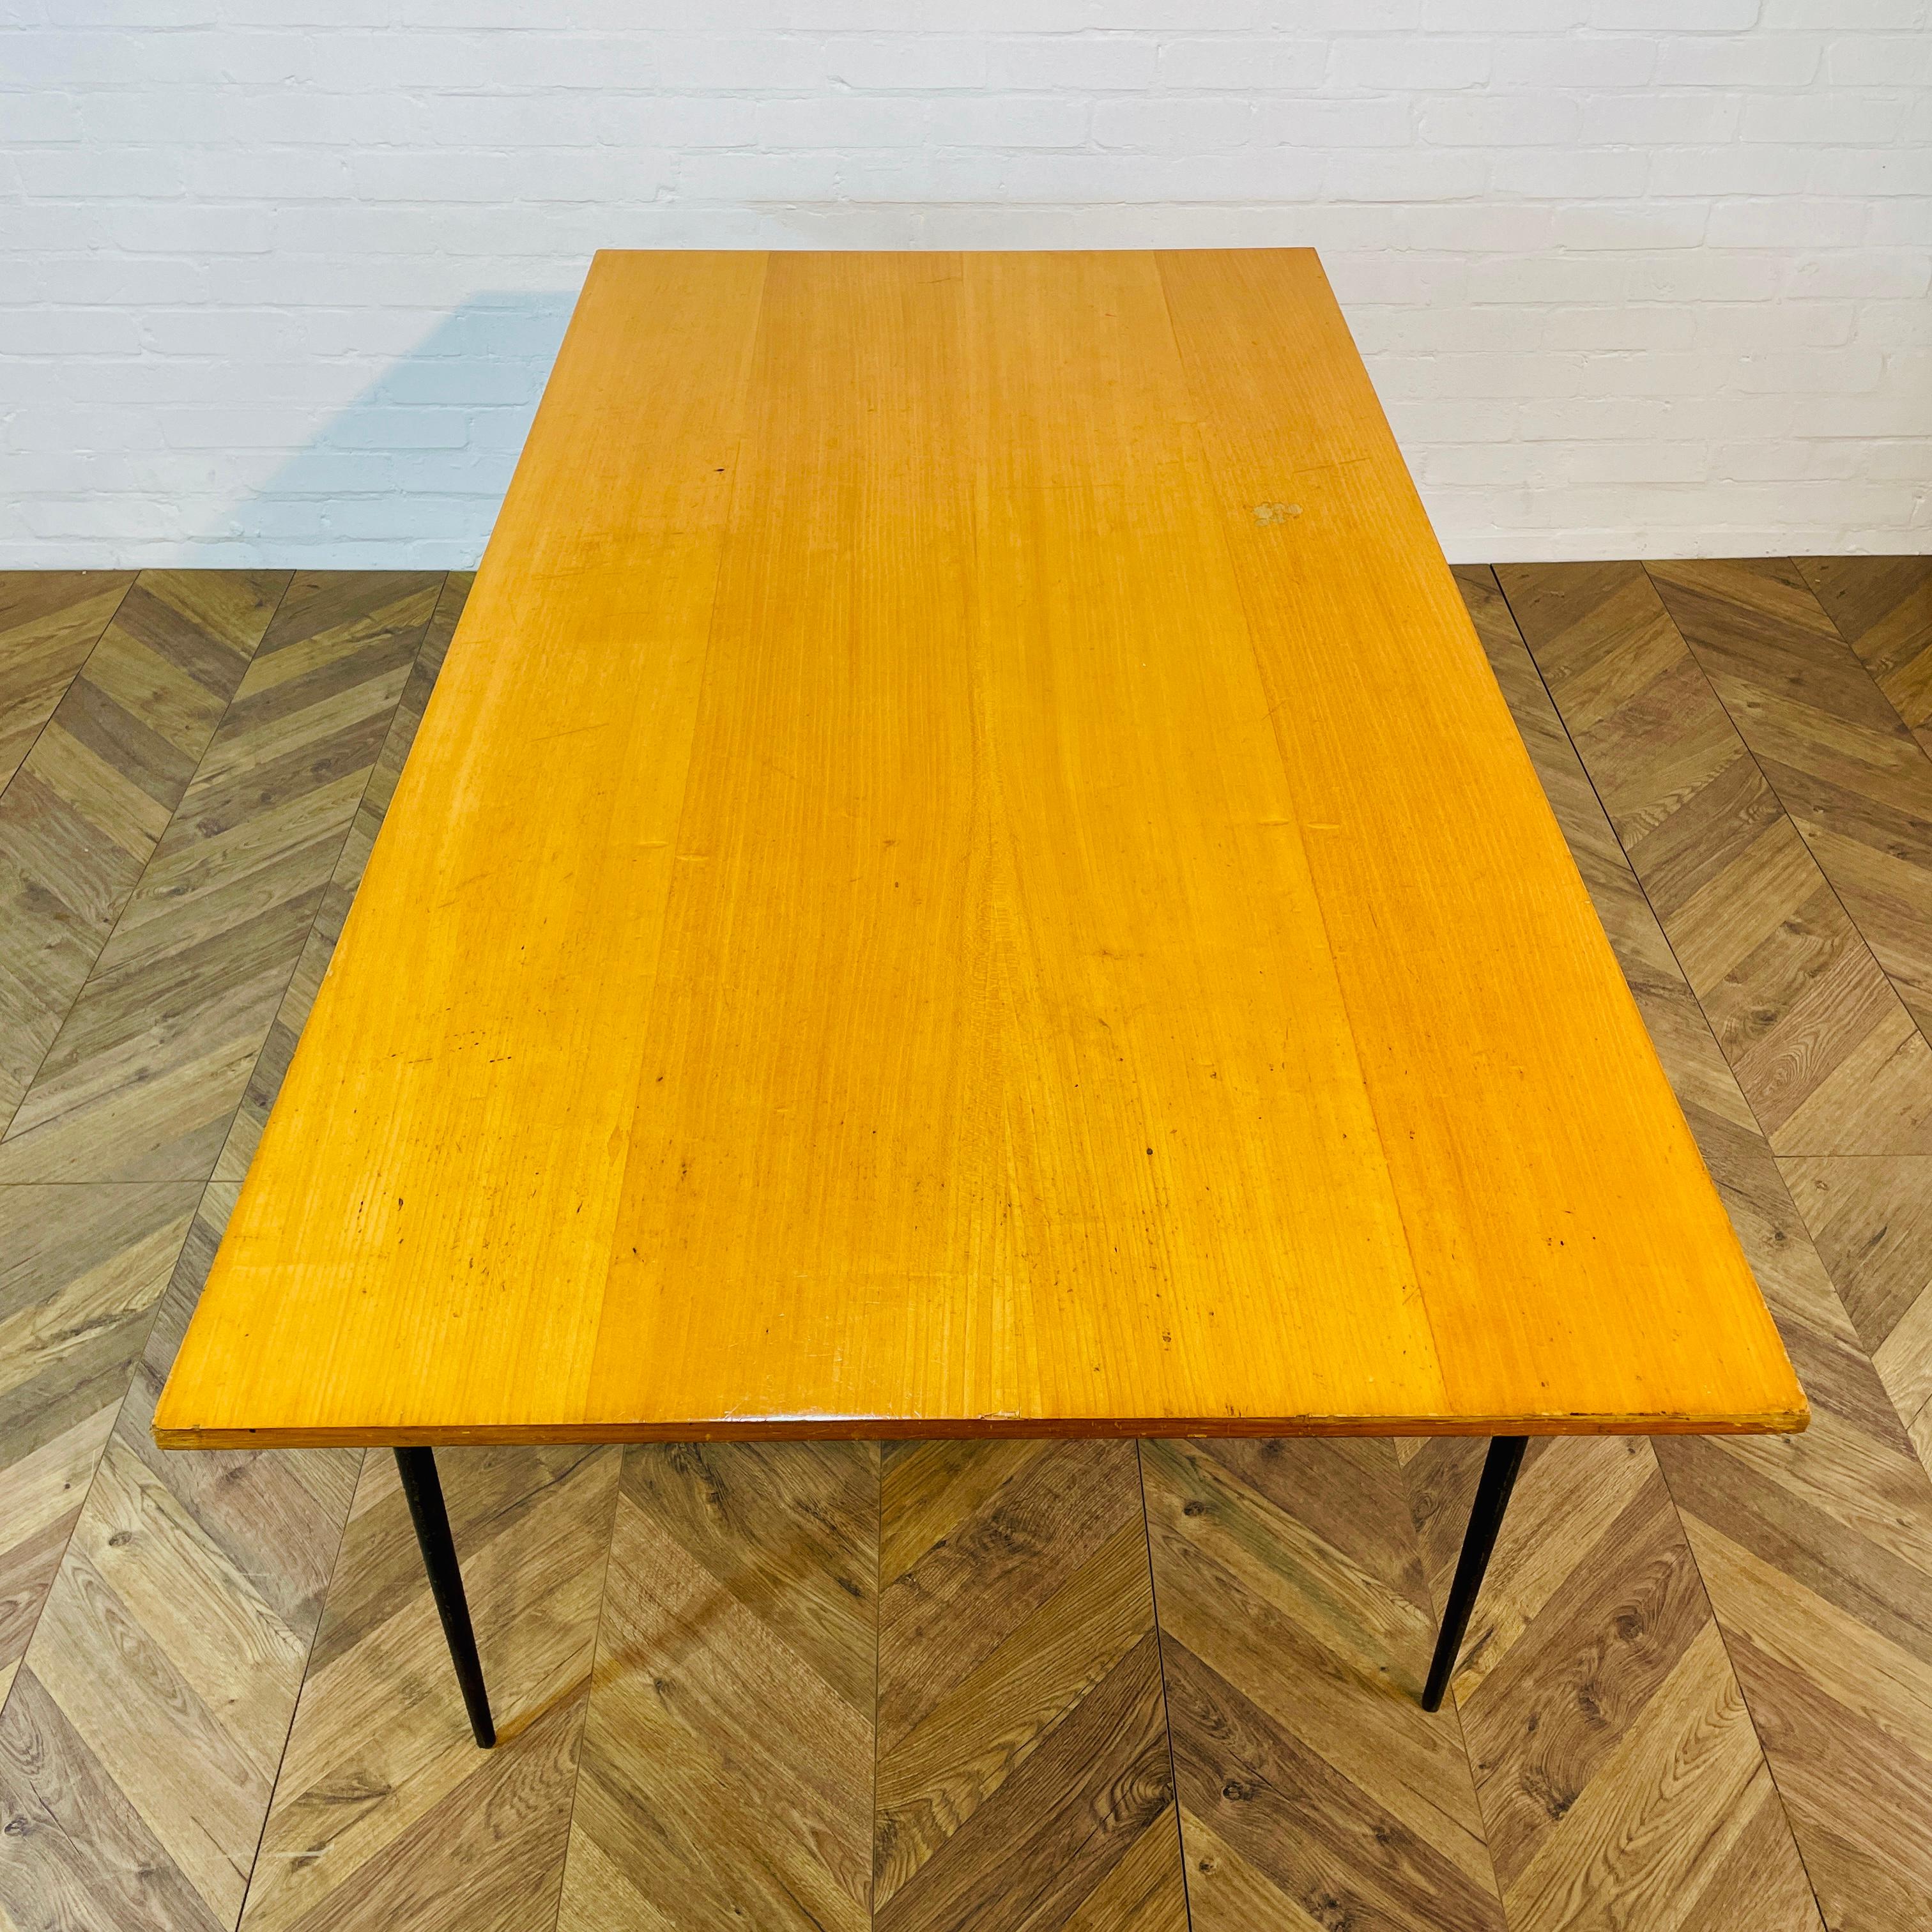 A Large Former Cambridge University Lab Table or Desk, circa 1970s / 80s.

The table sits on a black steel frame with a wooden top.

It has a lovely worn patina and is in great condition, but does have marks and wear to the frame and top, as